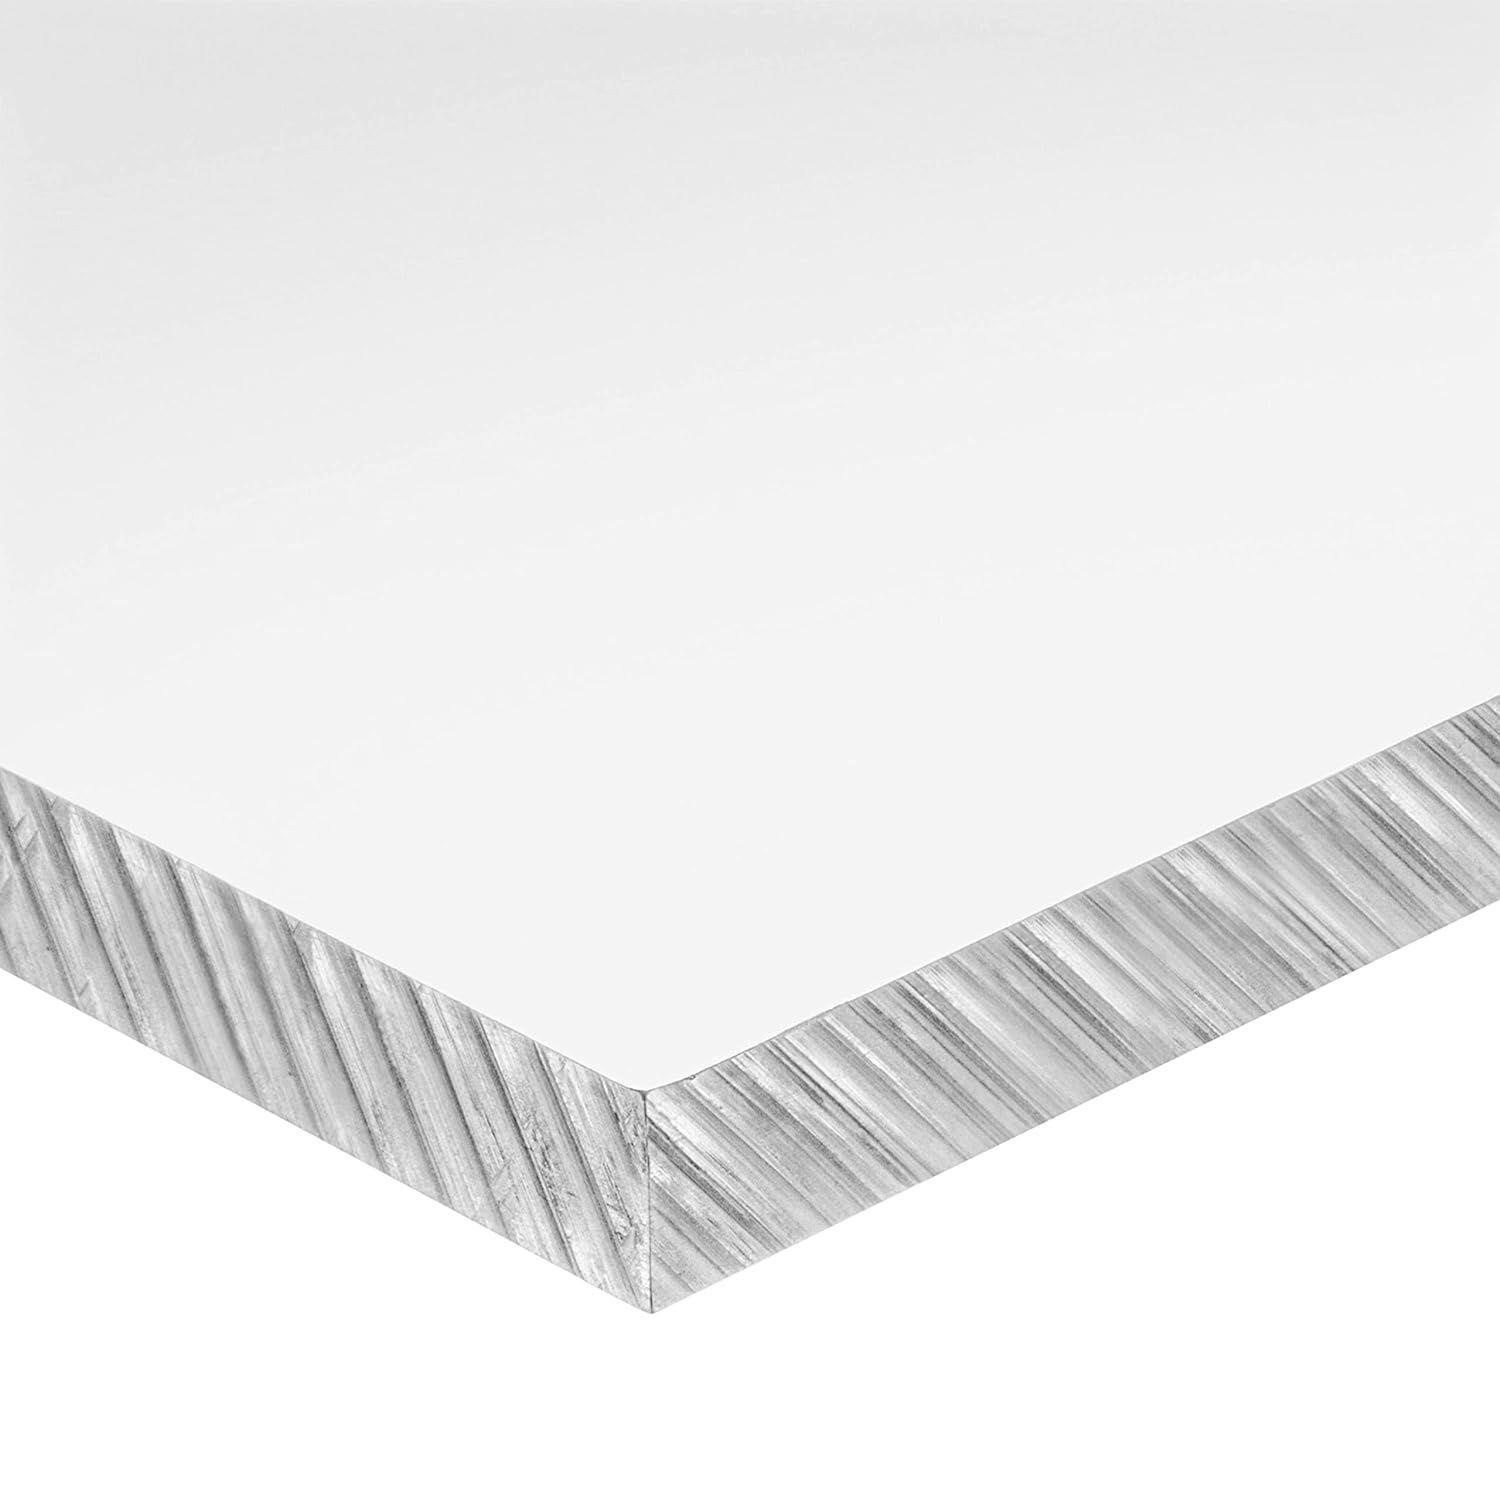 3/16”Thick x 24”Wide x 48”Long Polycarbonate Sheet